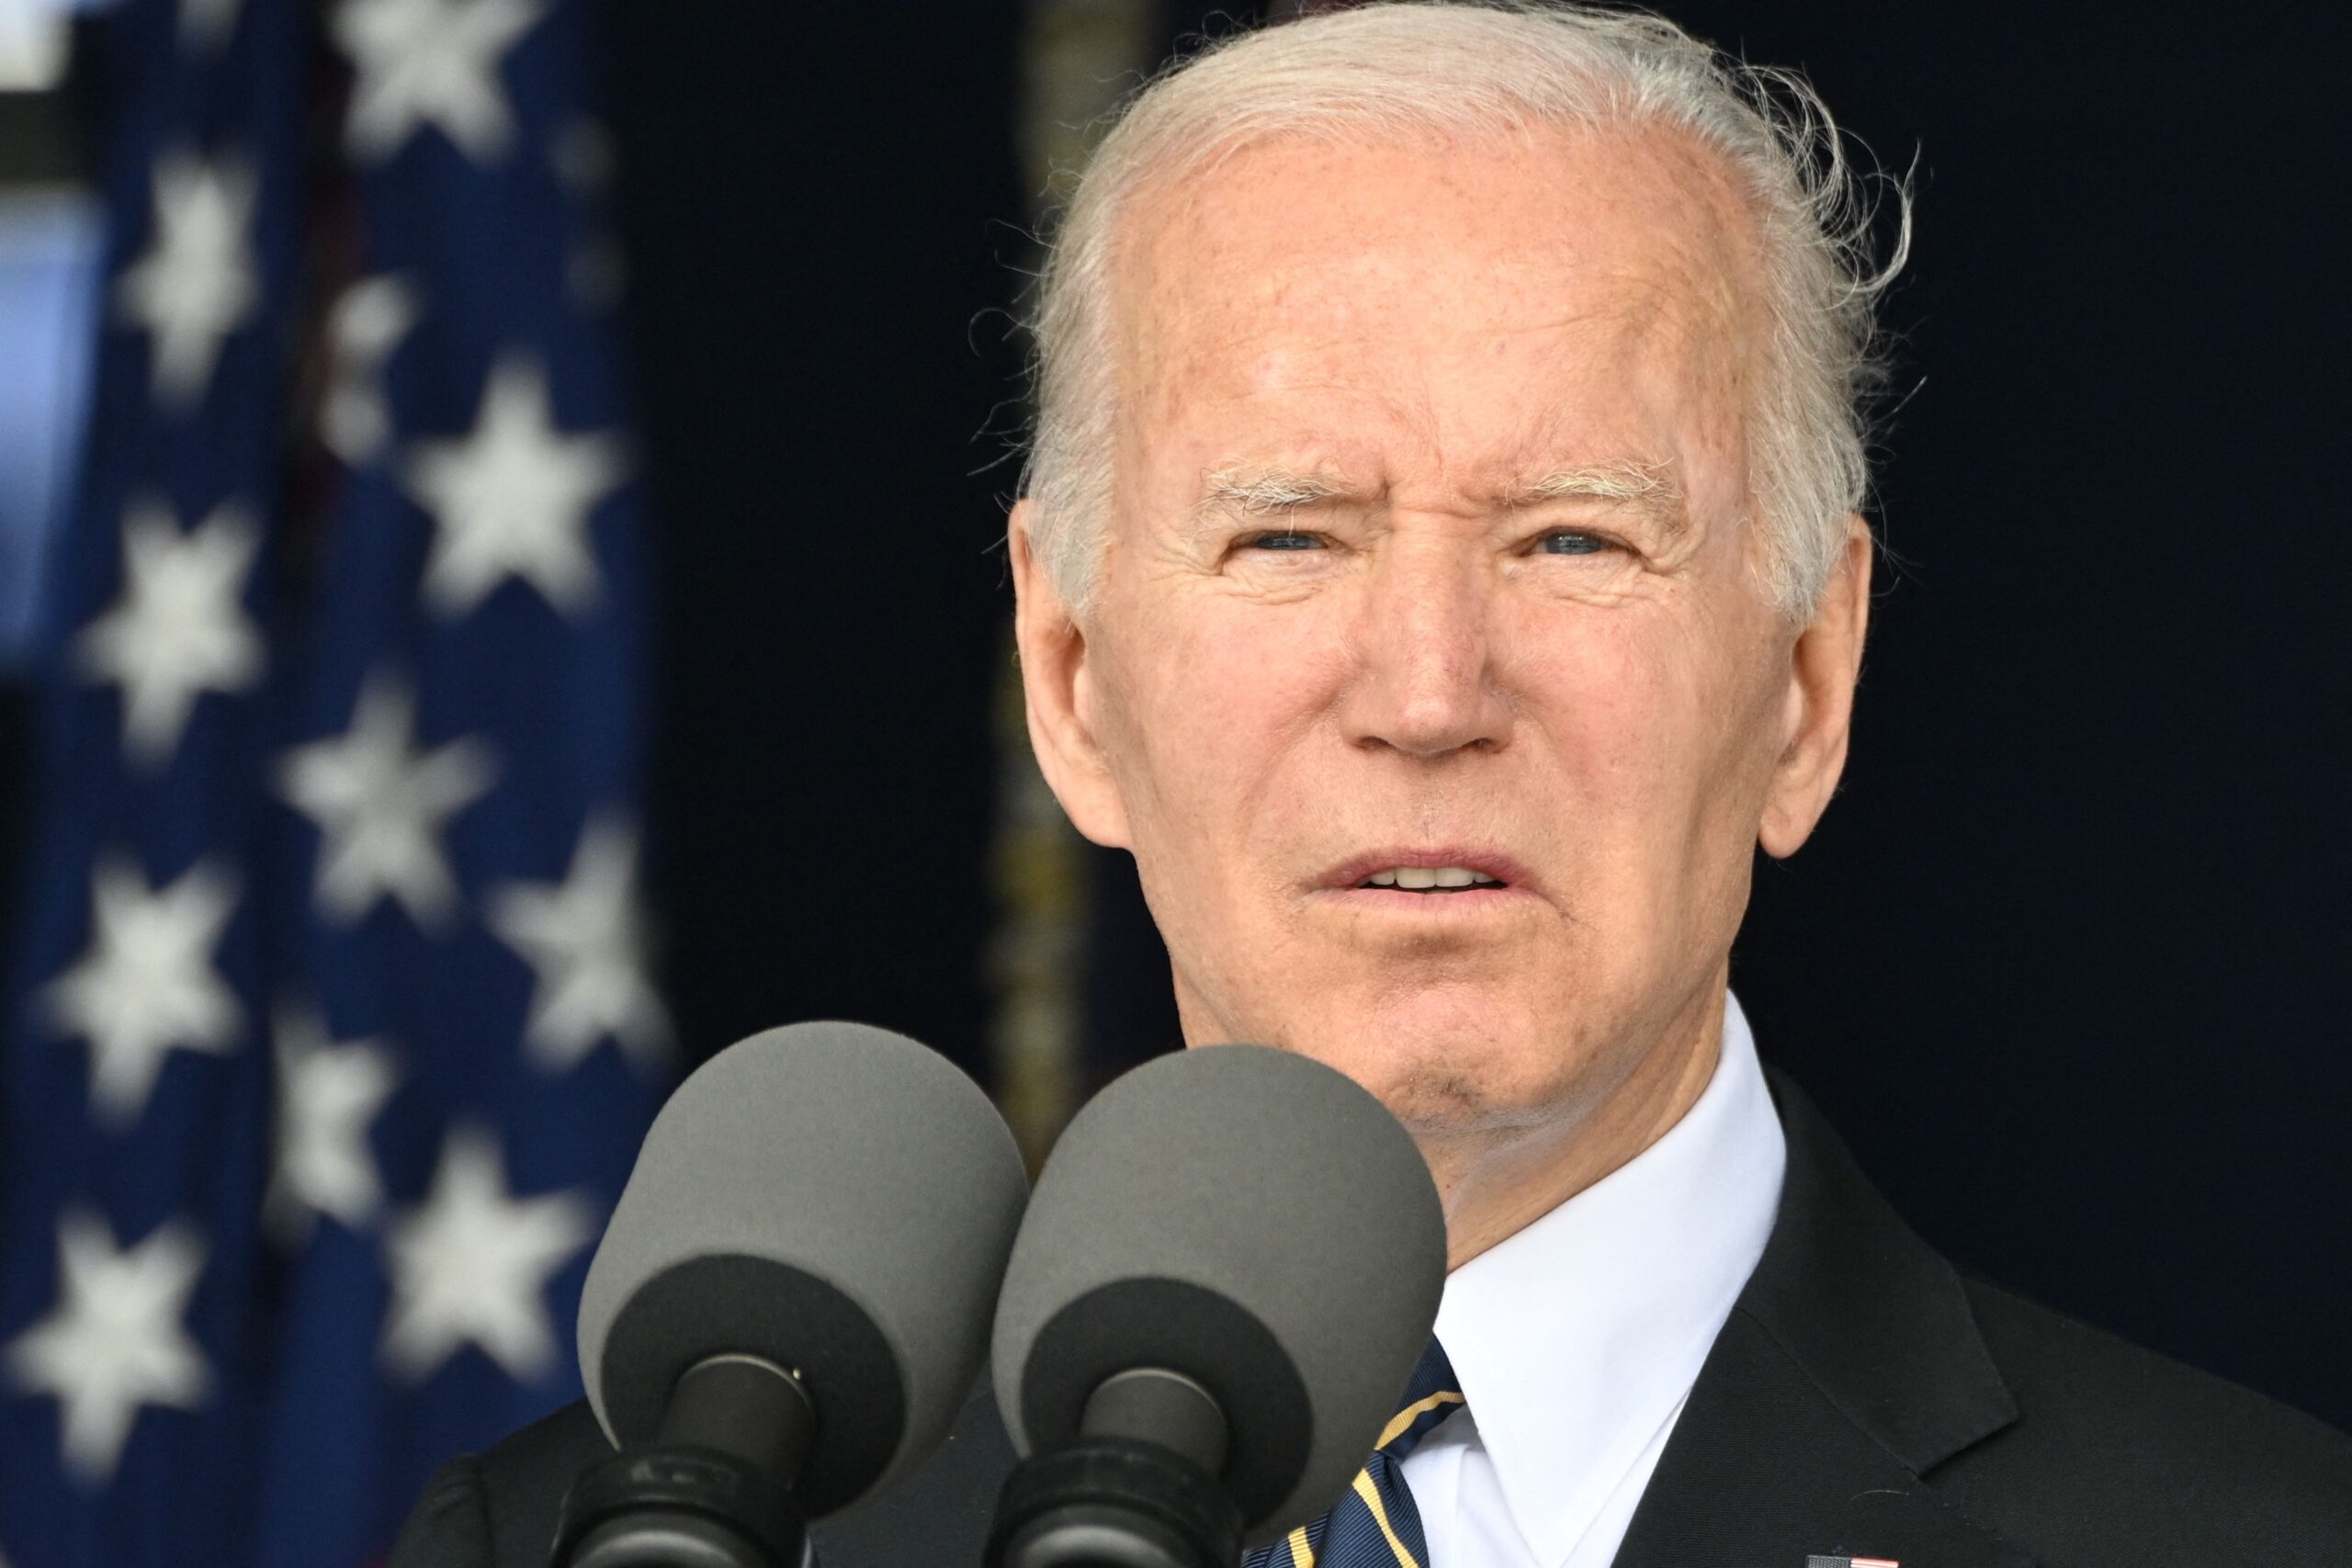 Email Shows Biden Planned to Nominate Anti-Abortion Republican to Federal Judgeship the Day Roe Was Overturned